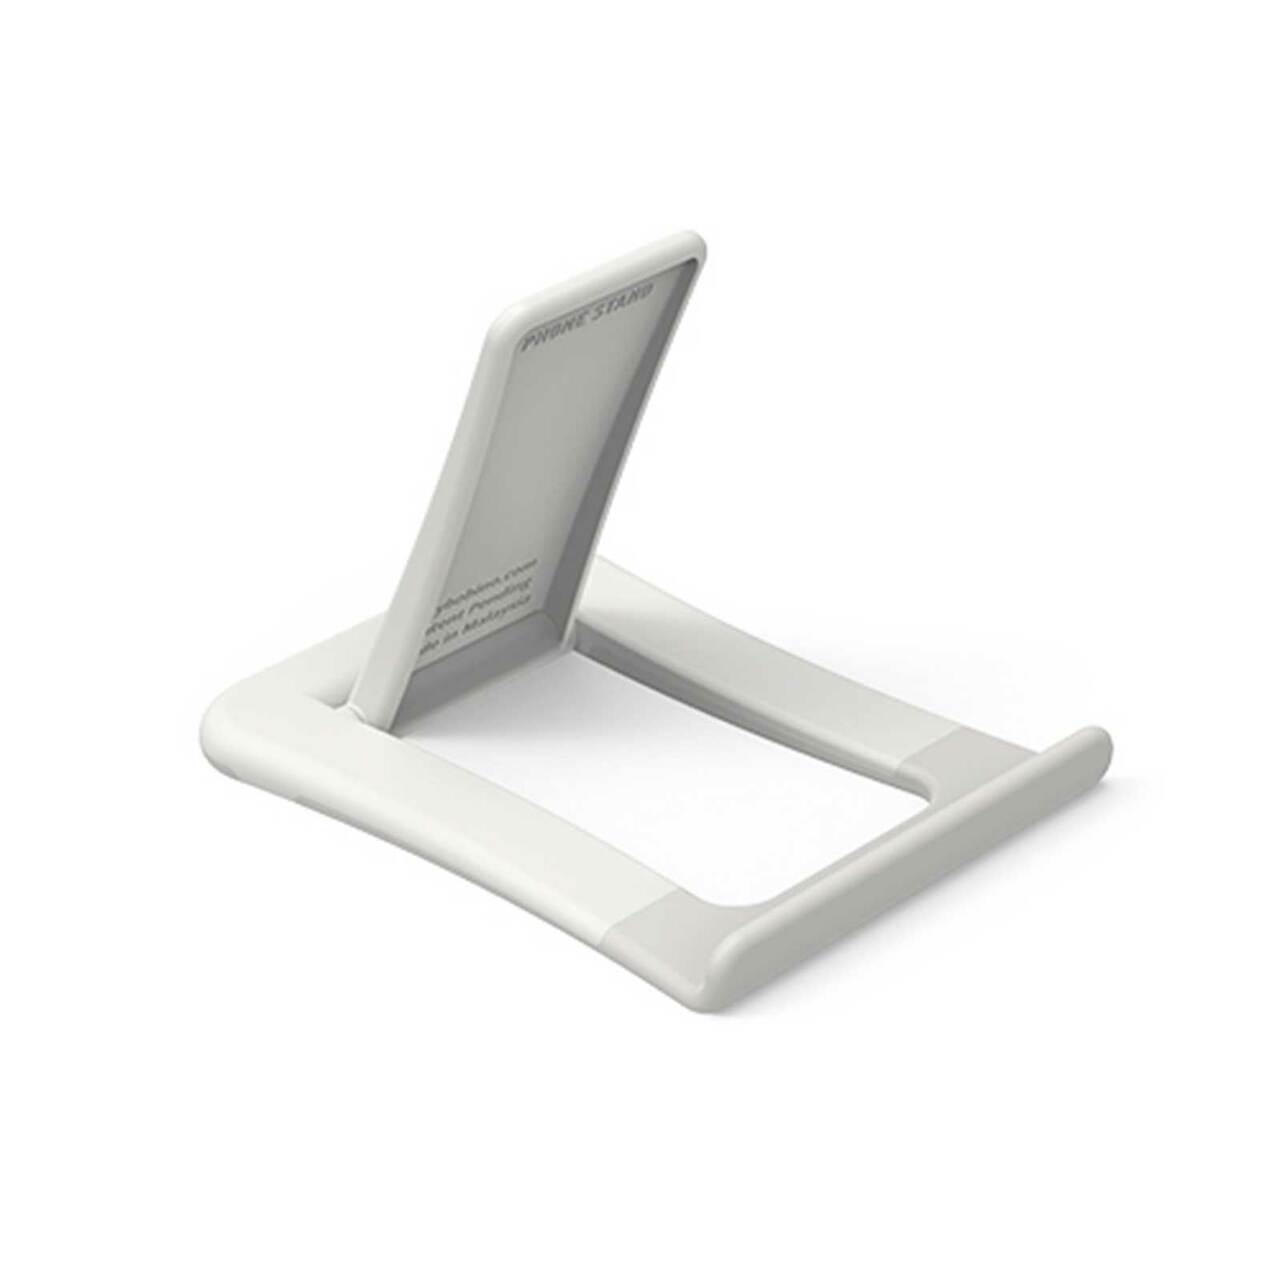 Phone Stand ~ enjoy the freedom of having both you hands available